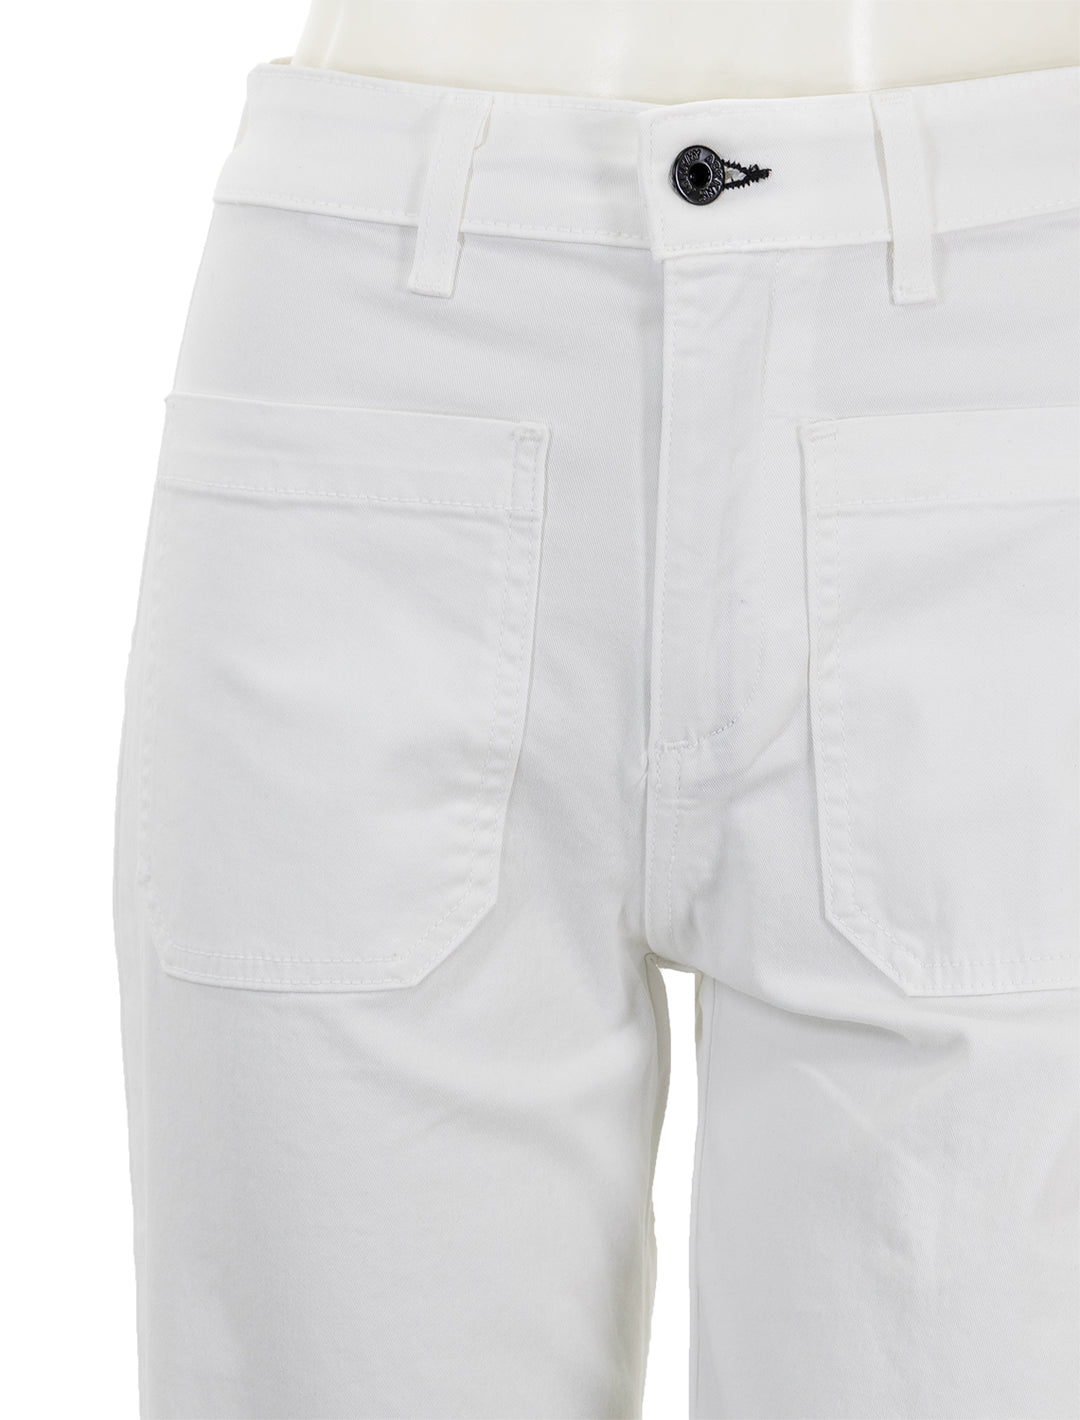 Close-up view of ASKK NY's Sailor Twill Pant in Ivory.